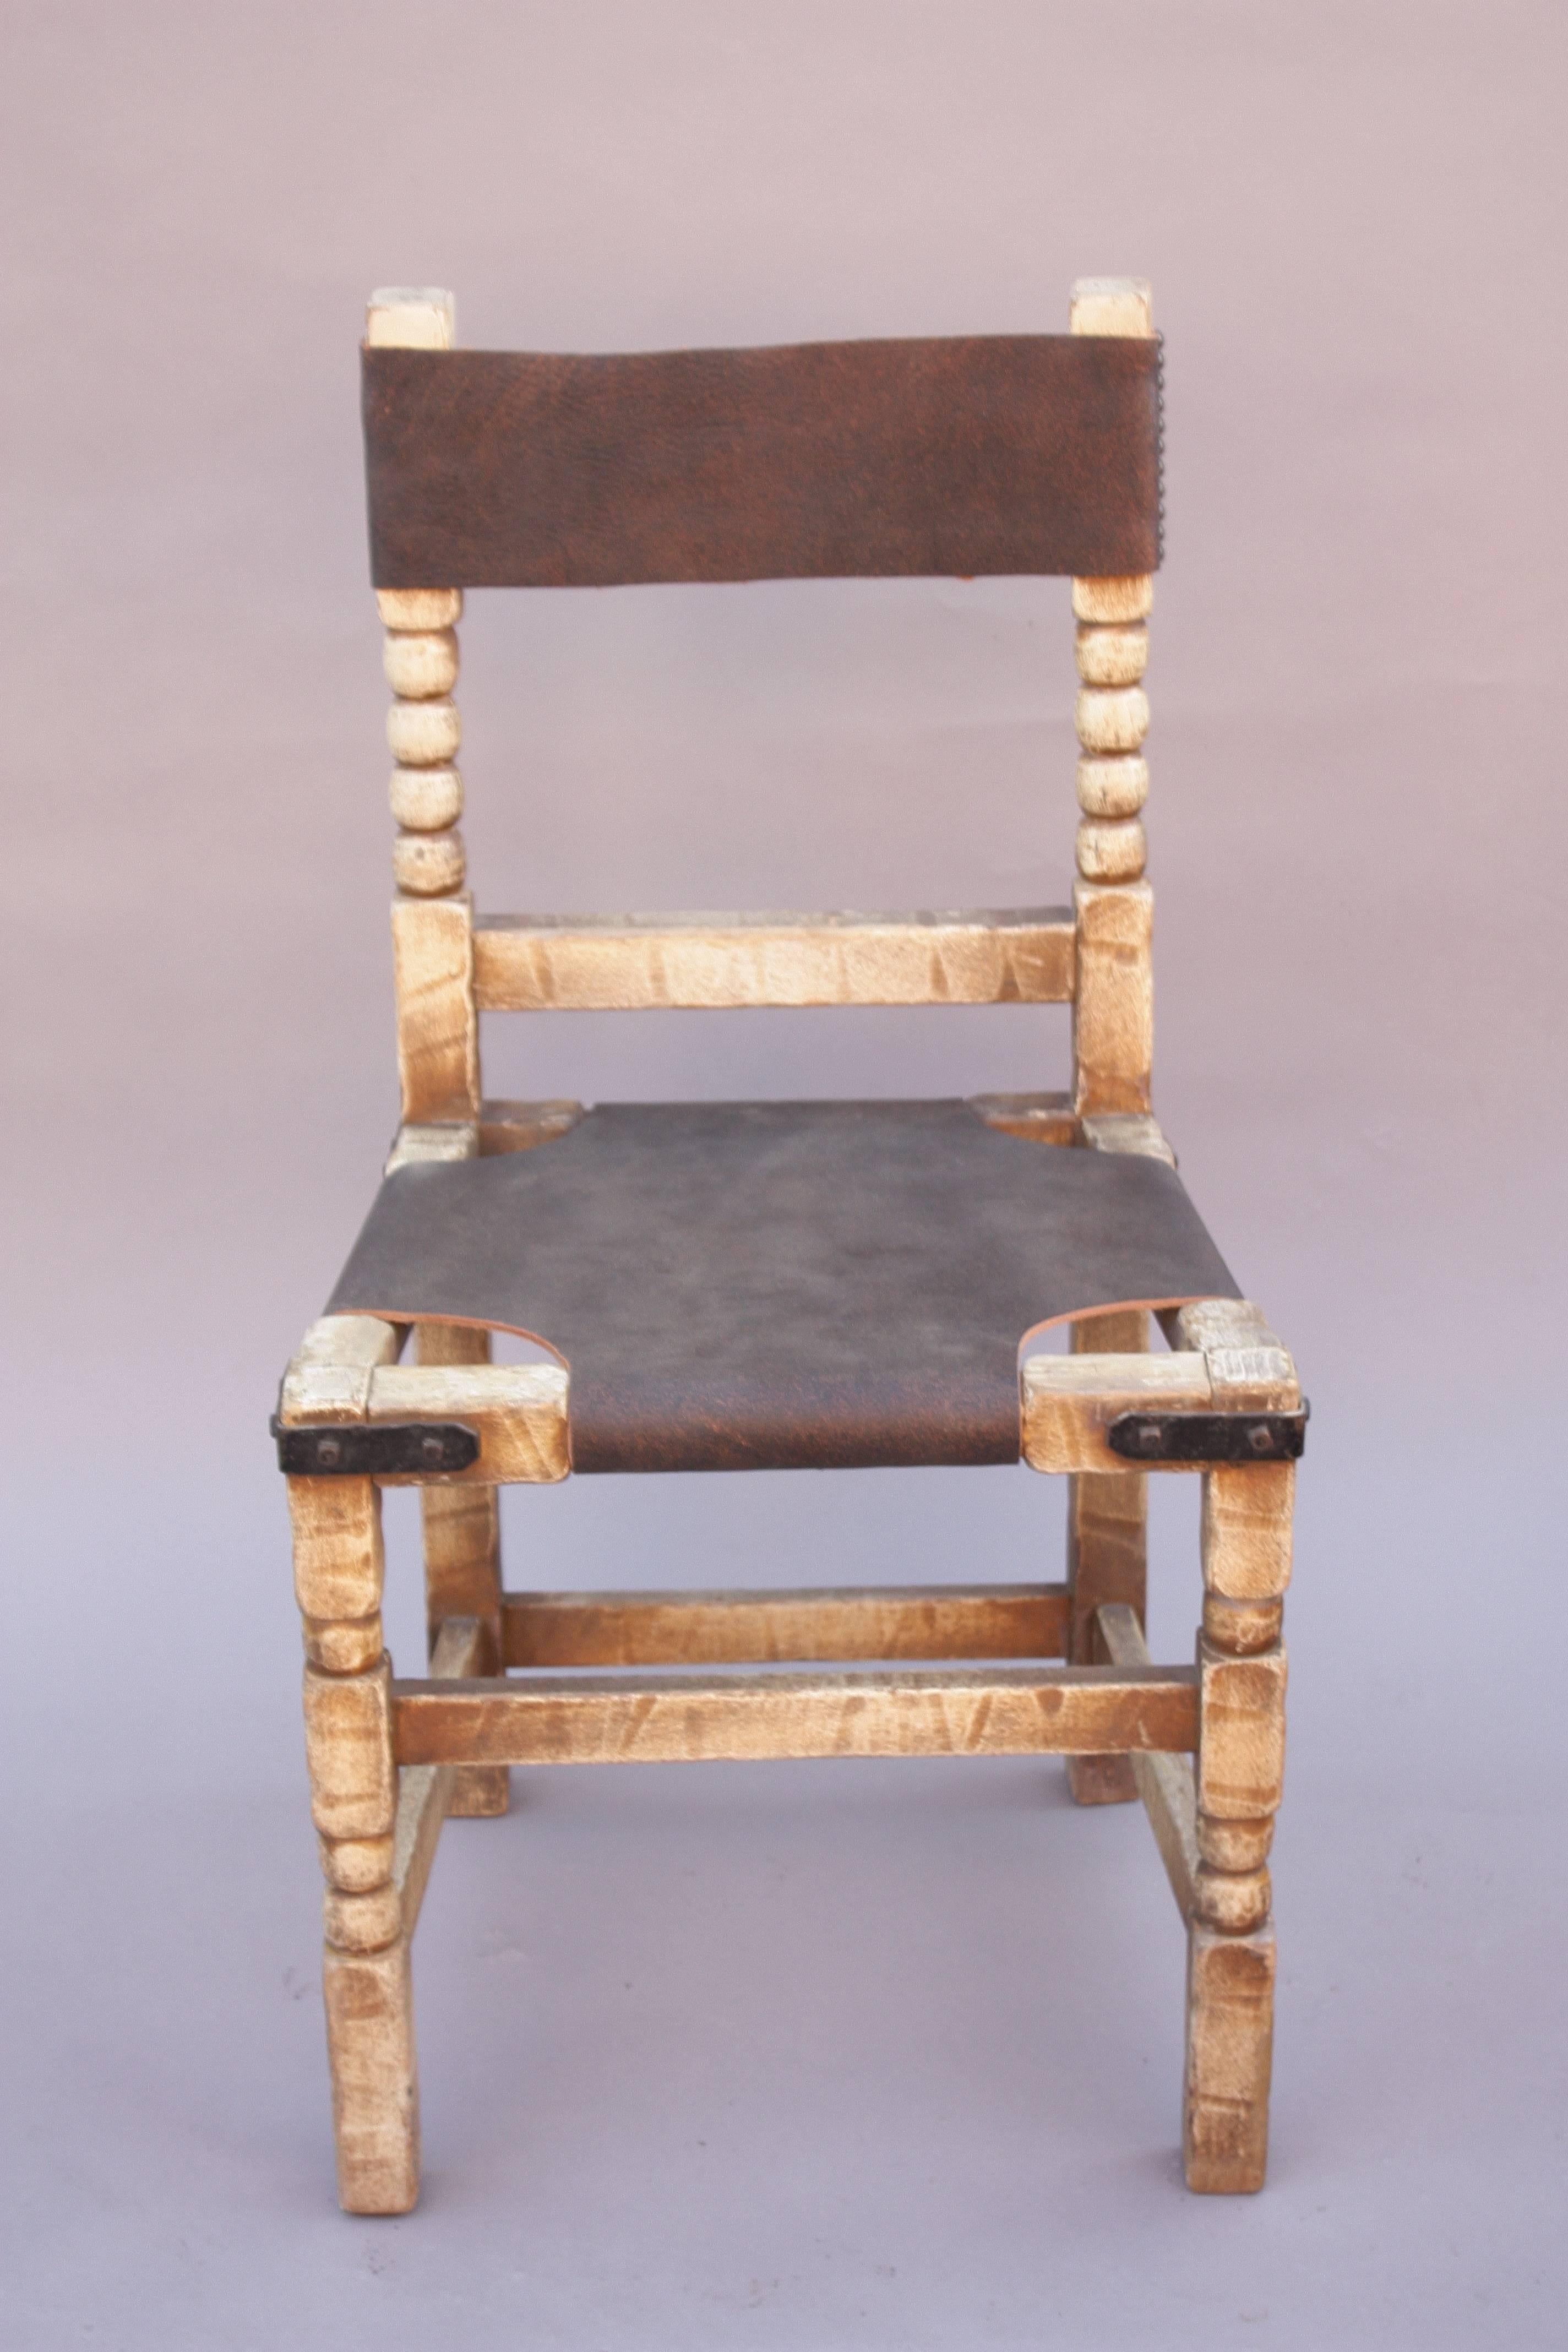 Monterey side chair with new leather upholstery, circa 1930s.